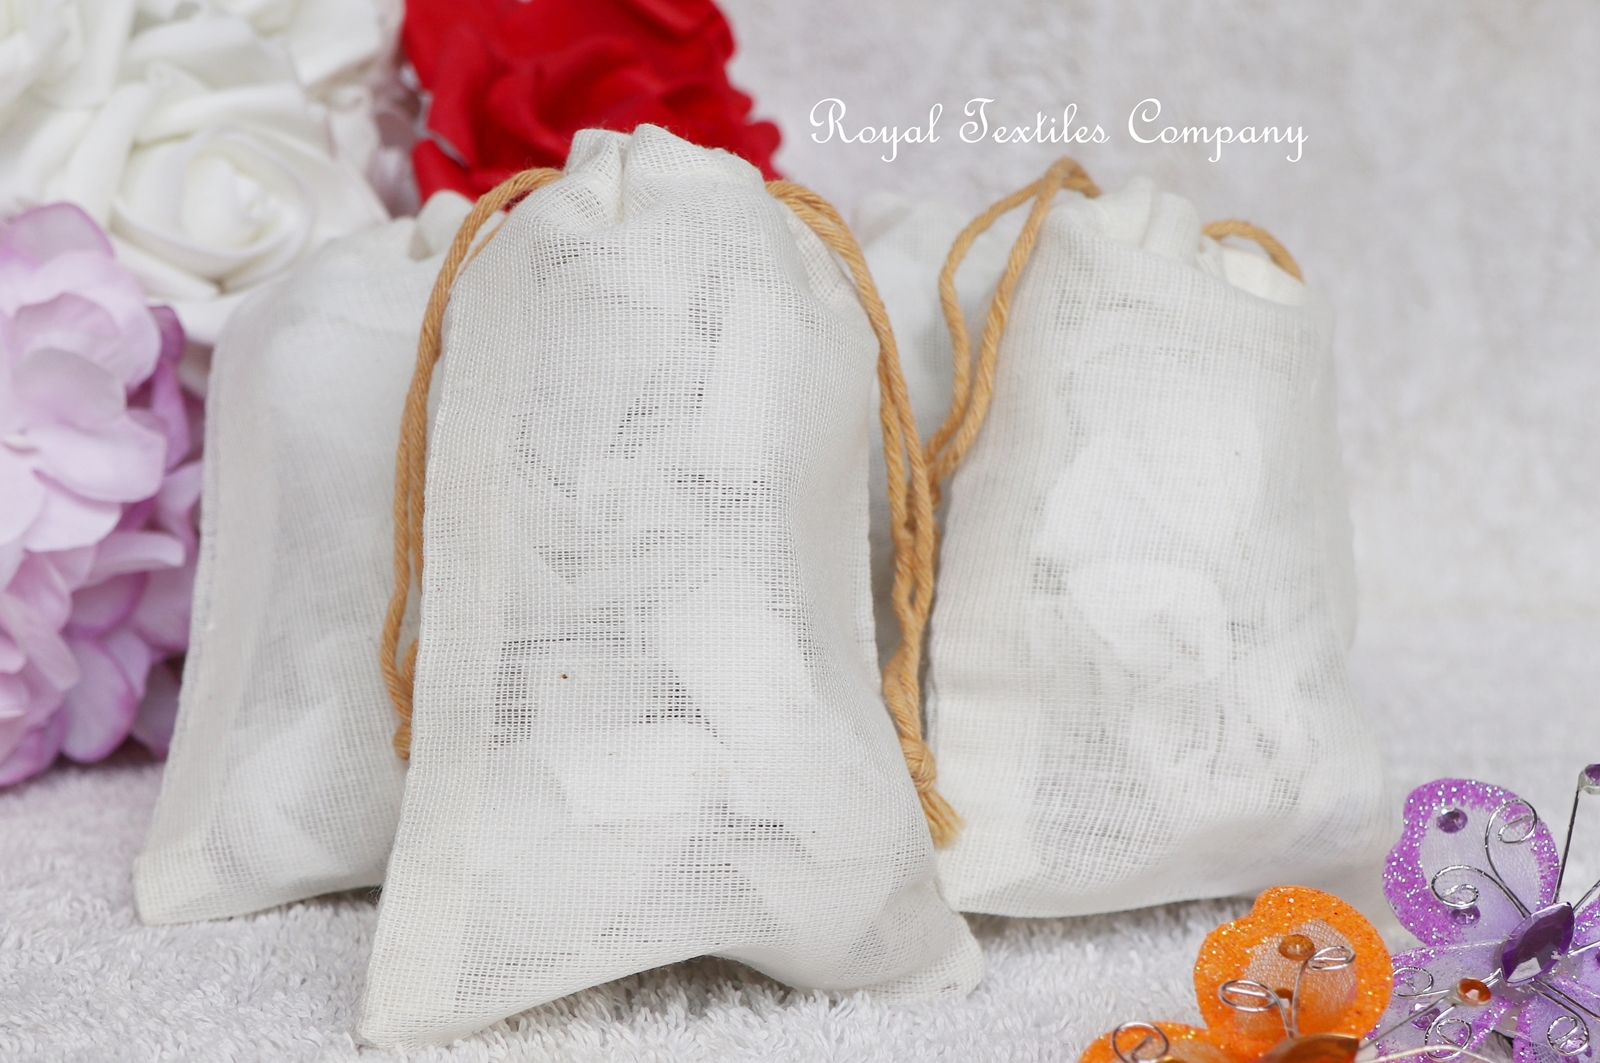 Breathable Single Drawstring Bags, Muslin Natural Bags, Flower Cheese Soup Spices Tea Filter Bags, Drawstring, Ecofriendly, Reusable Muslin Bags, Natural Bags, Jewelry bags, gift bags, packaging bags, wedding favors, storage pouch, cloth bags, natural bags, organic cotton, reusable, christmas bags, muslin bags